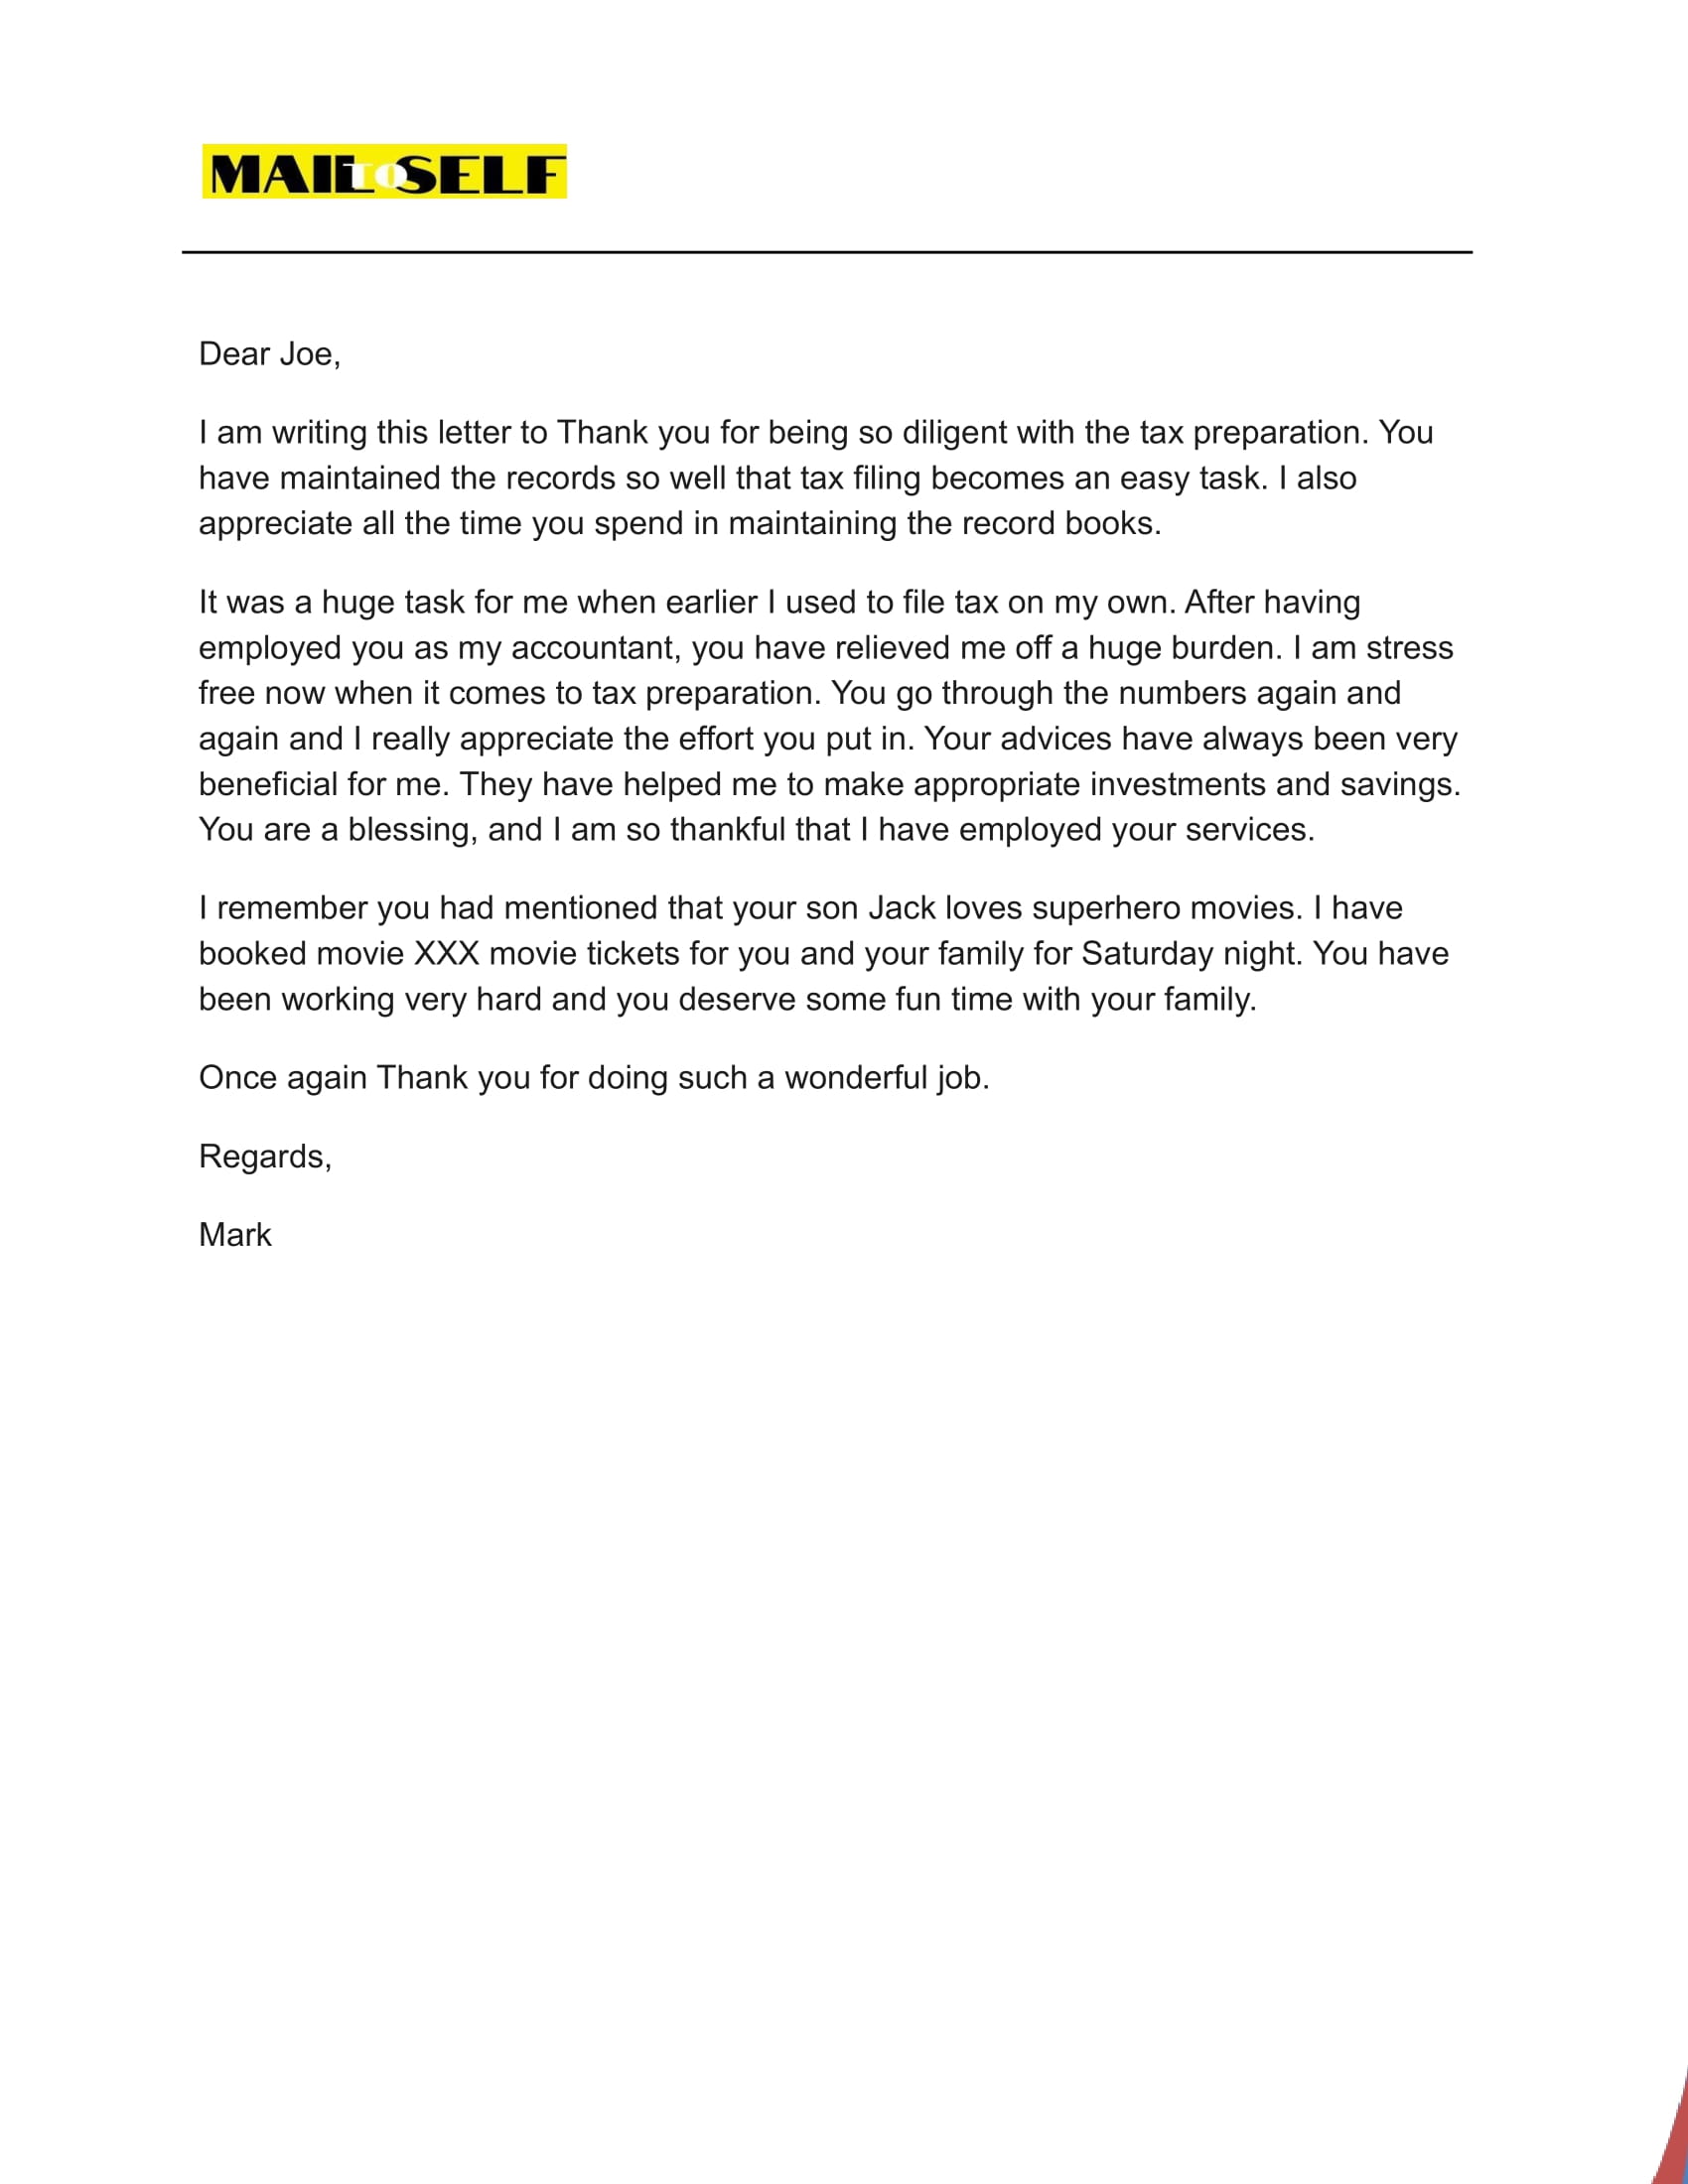 Sample #1 Thank You Letter to Your Accountant for Tax Preparation